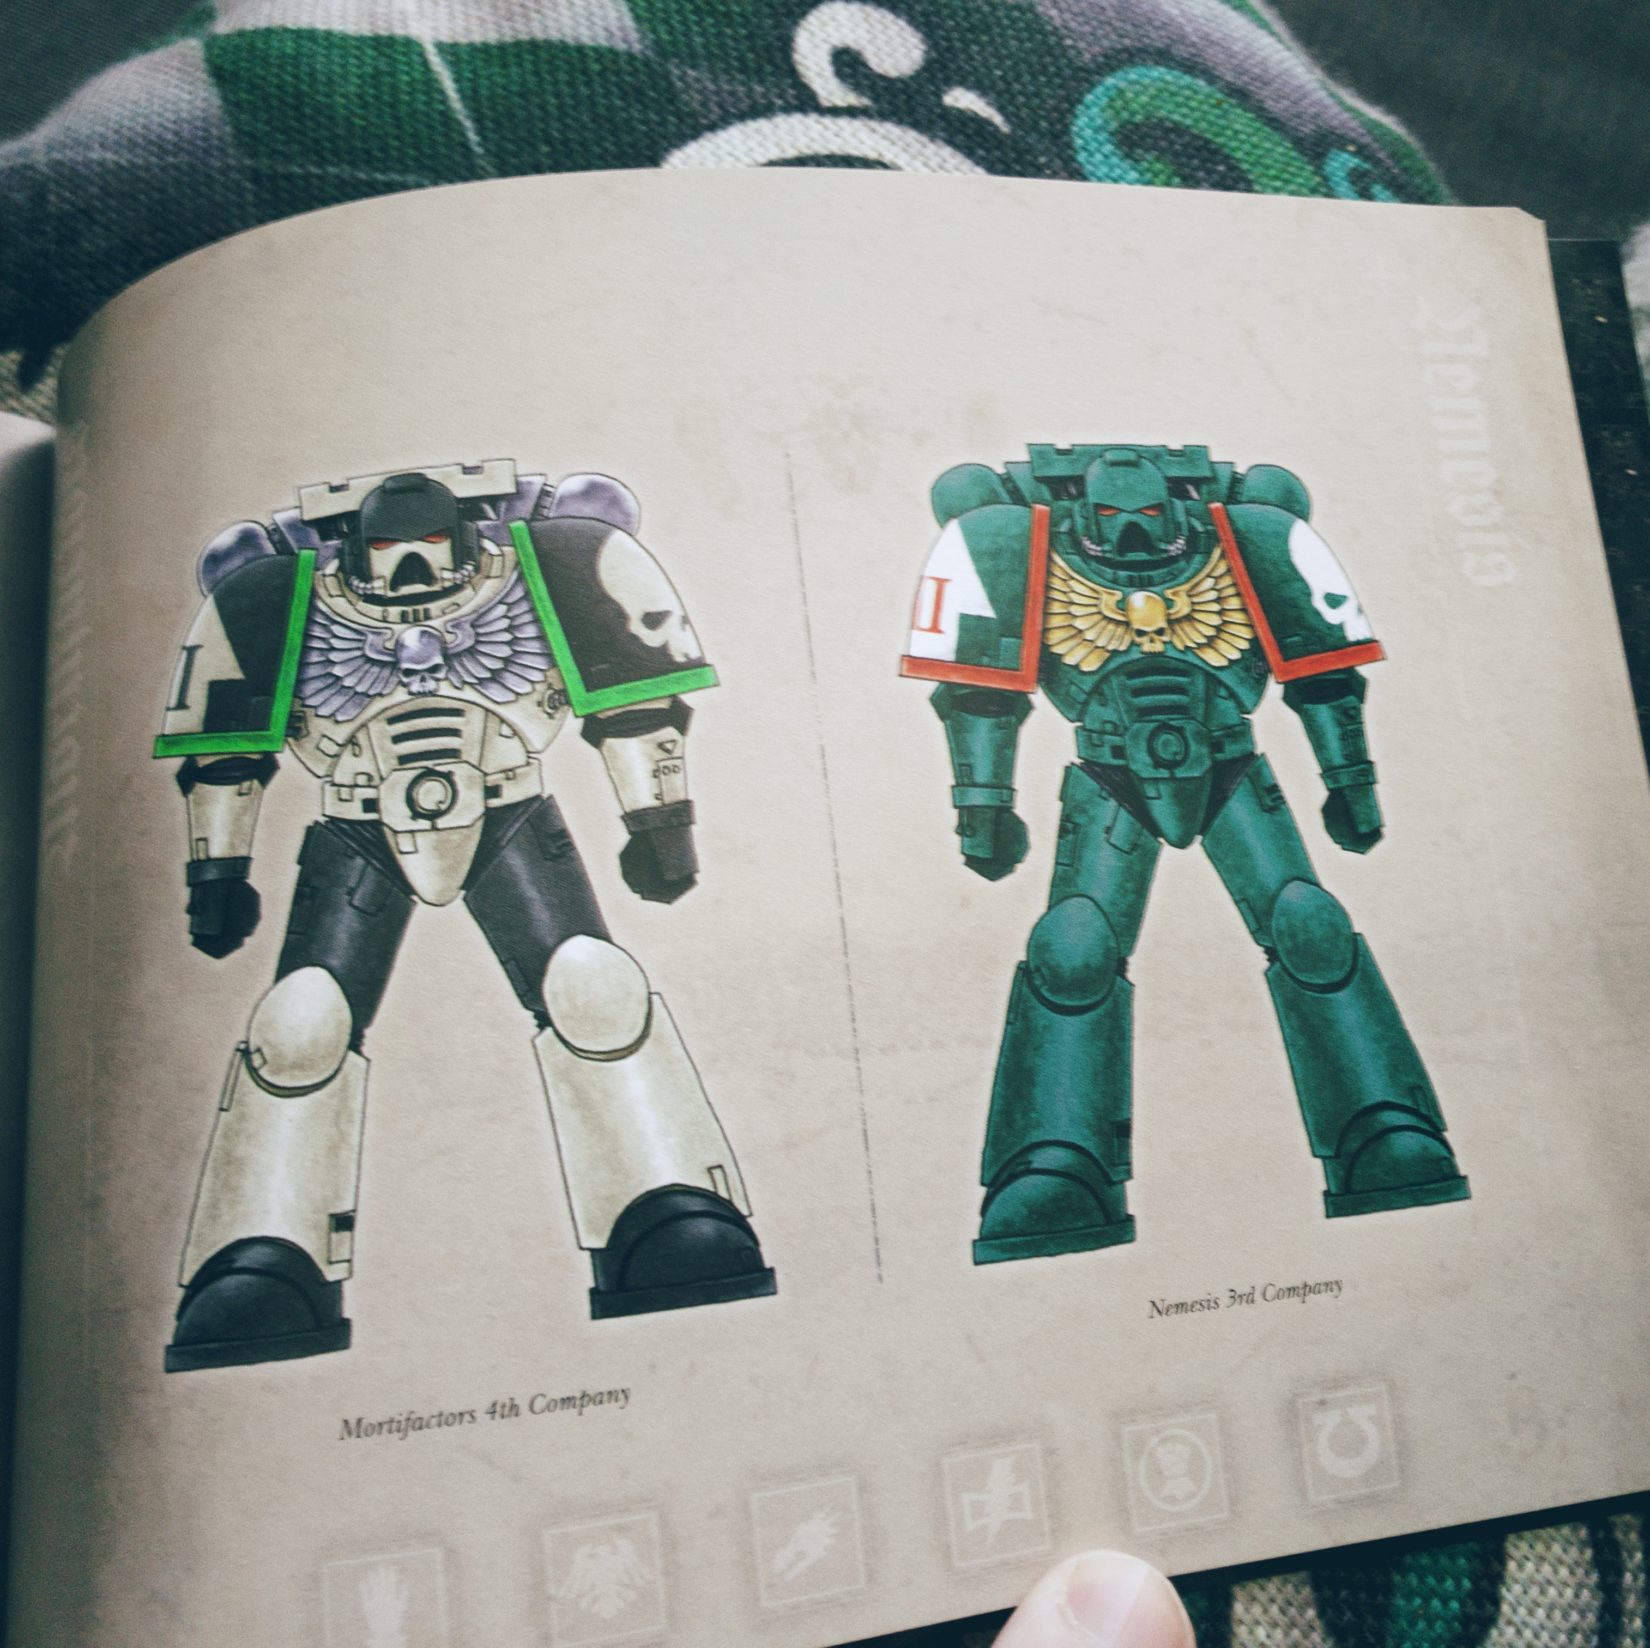 Page from “Successor Chapters” booklet showing Mortifactor and Nemesis chapter colour schemes